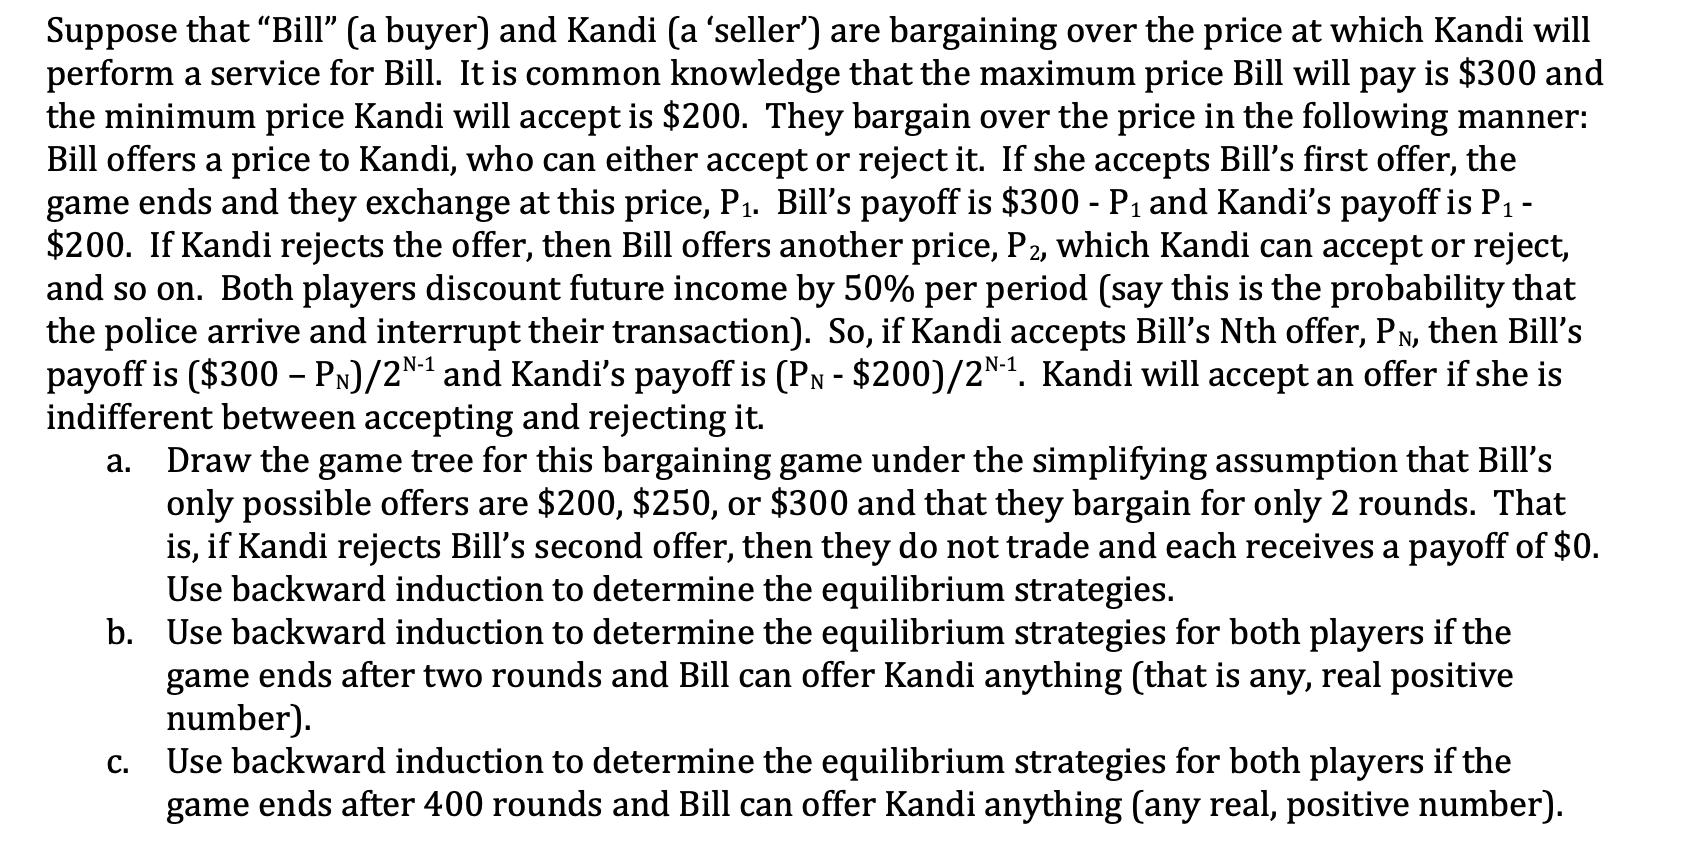 Suppose that “Bill” (a buyer) and Kandi (a ‘seller) are bargaining over the price at which Kandi will perform a service for